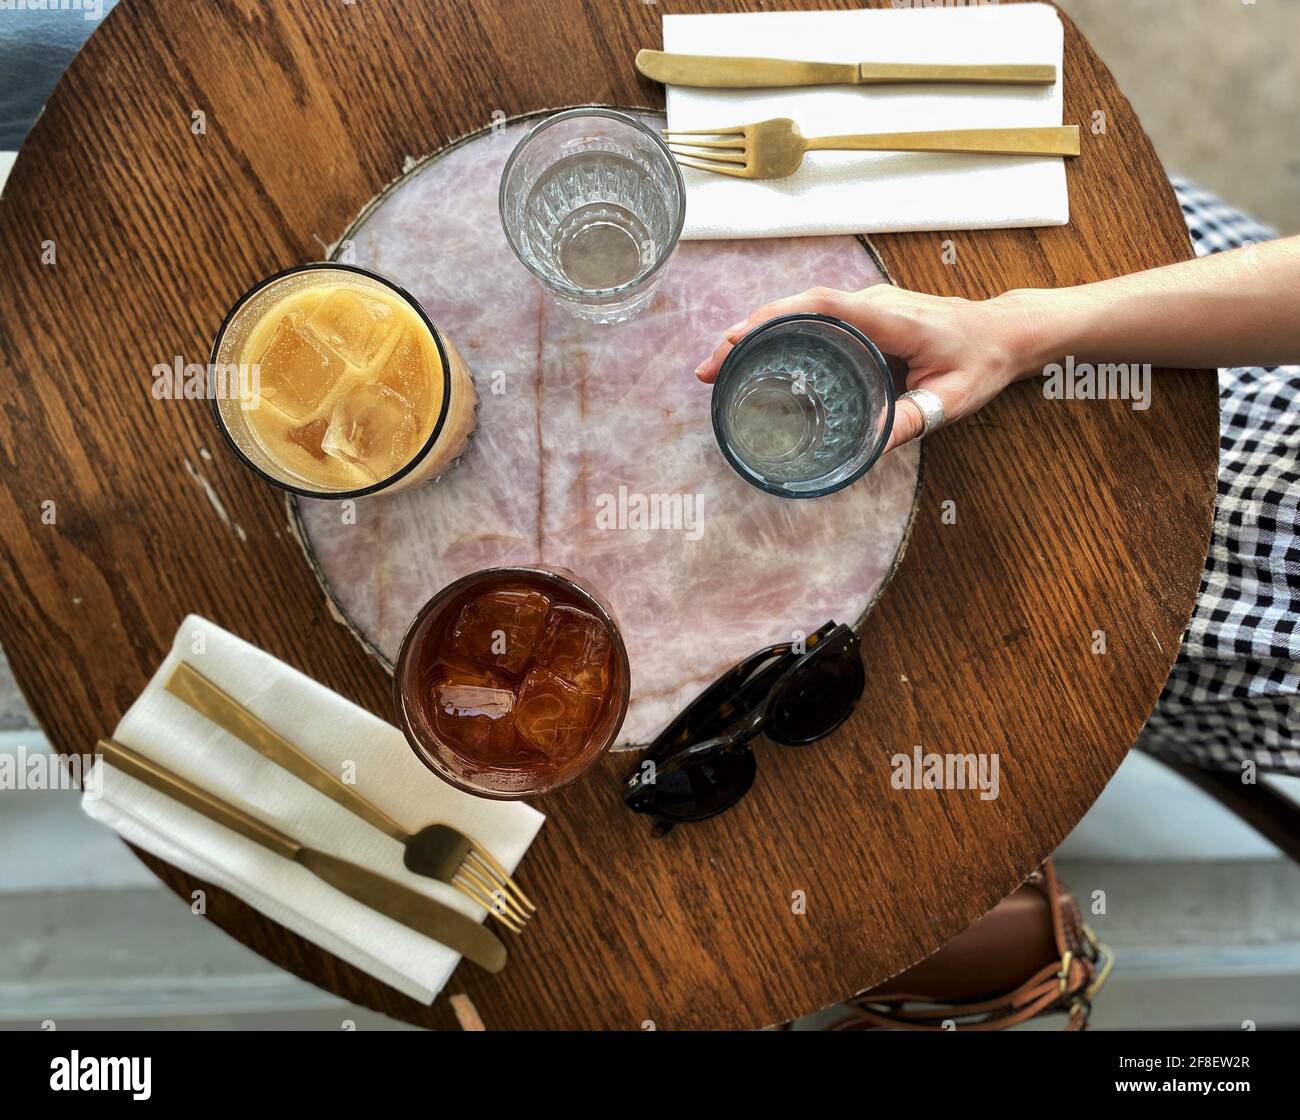 Cup of iced coffee beverage made with macadamia milk and herbal infusion iced tea on a wooden table with gold cutlery and a woman's hand grabbing a cu Stock Photo